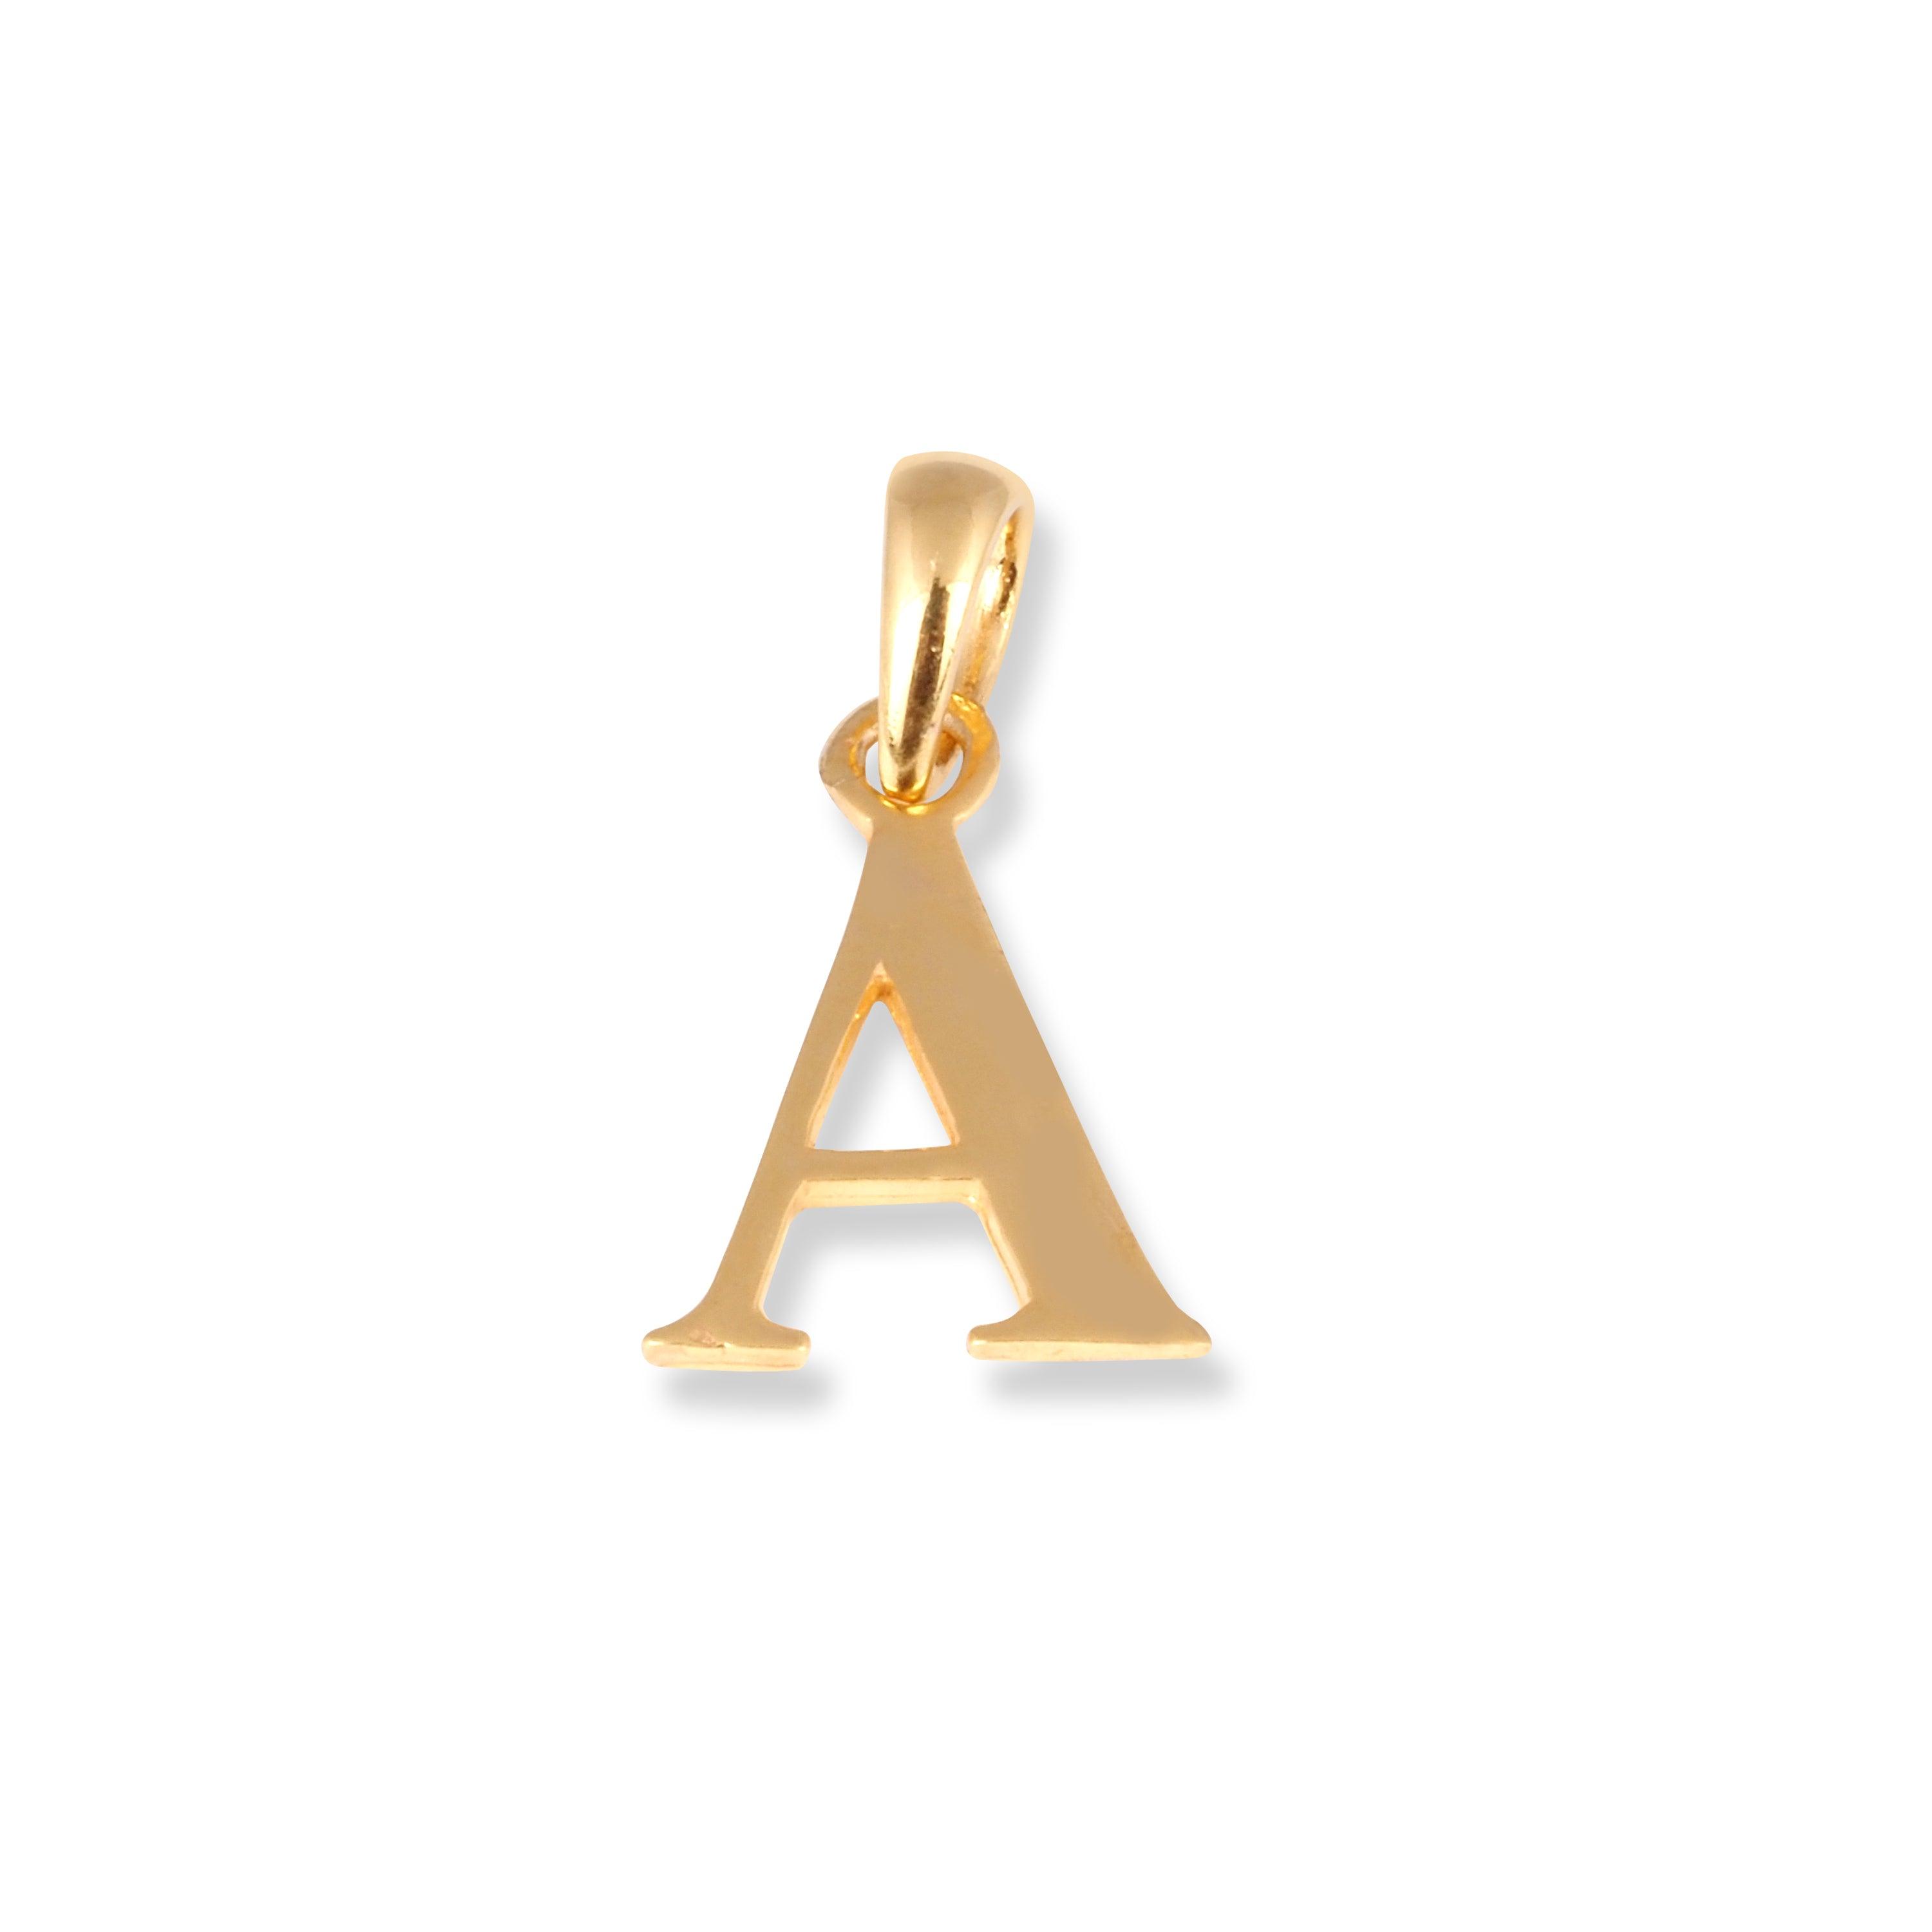 22ct Gold 'A' Initial Pendant P-7049-A - Minar Jewellers